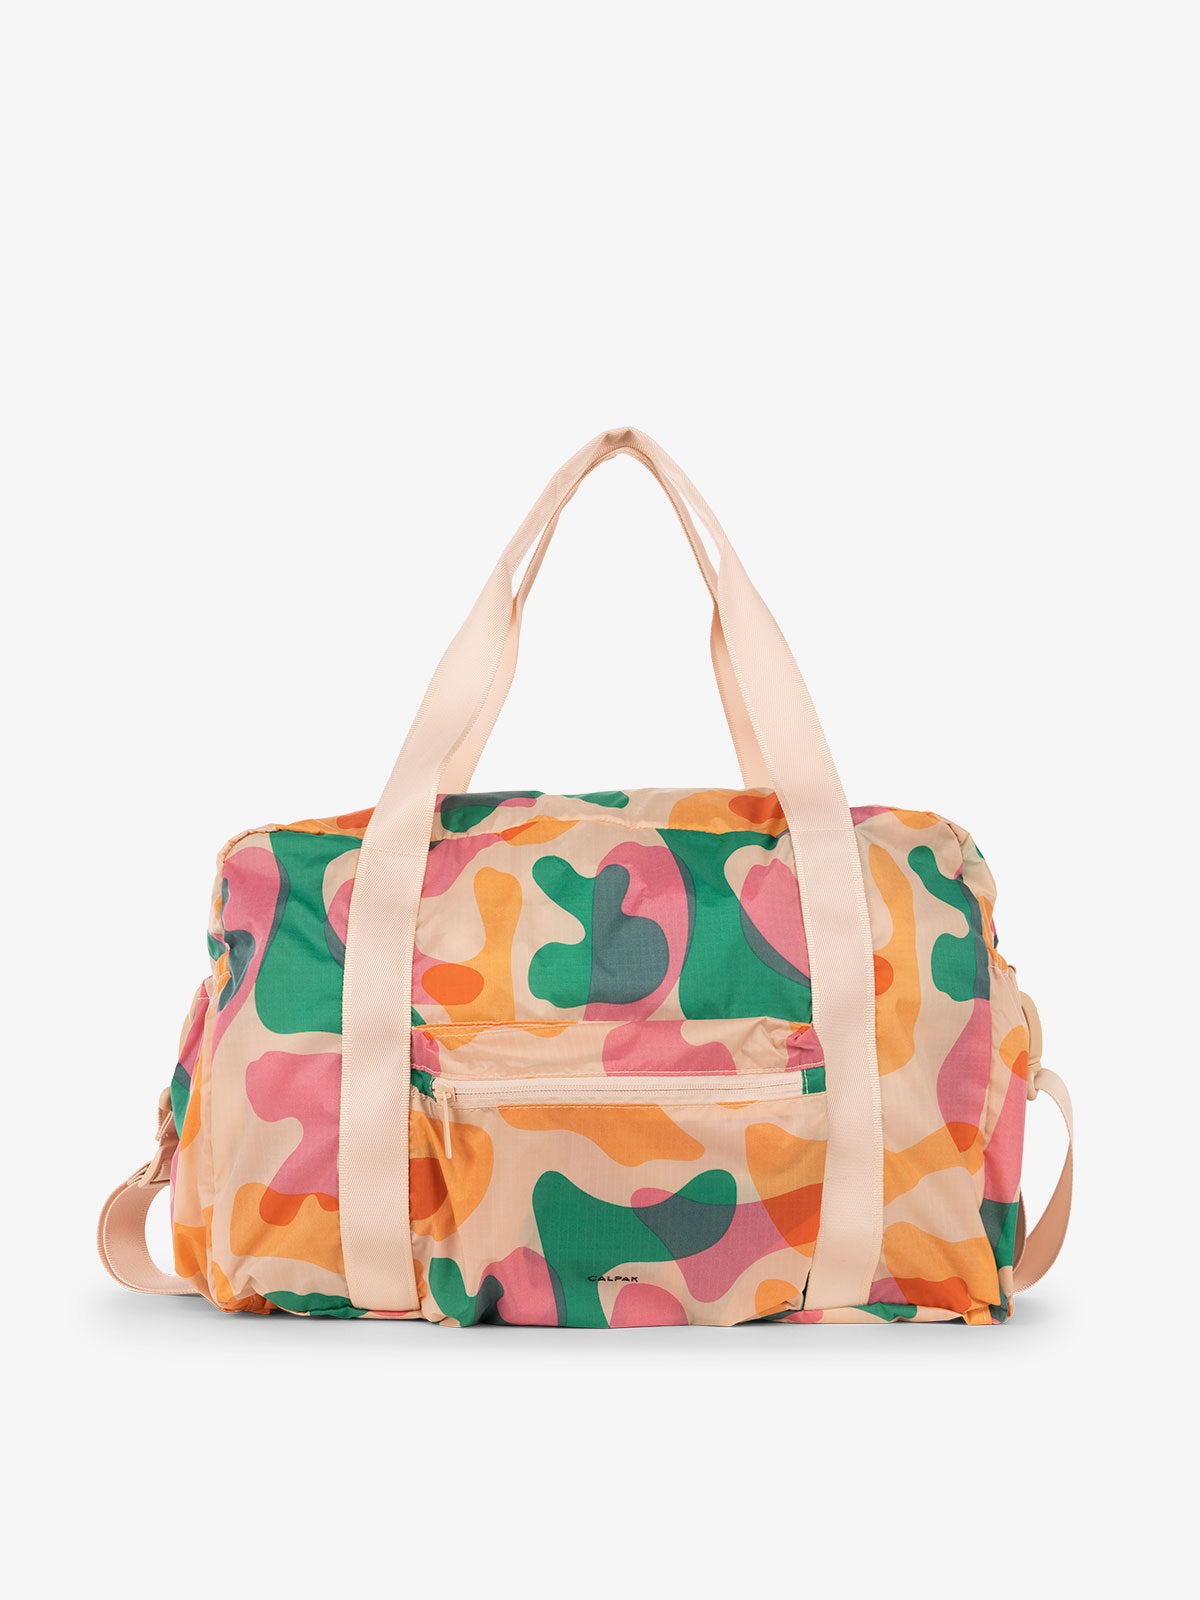 CALPAK Compakt duffel bag with removable crossbody strap and water resistant fabric in modern abstract